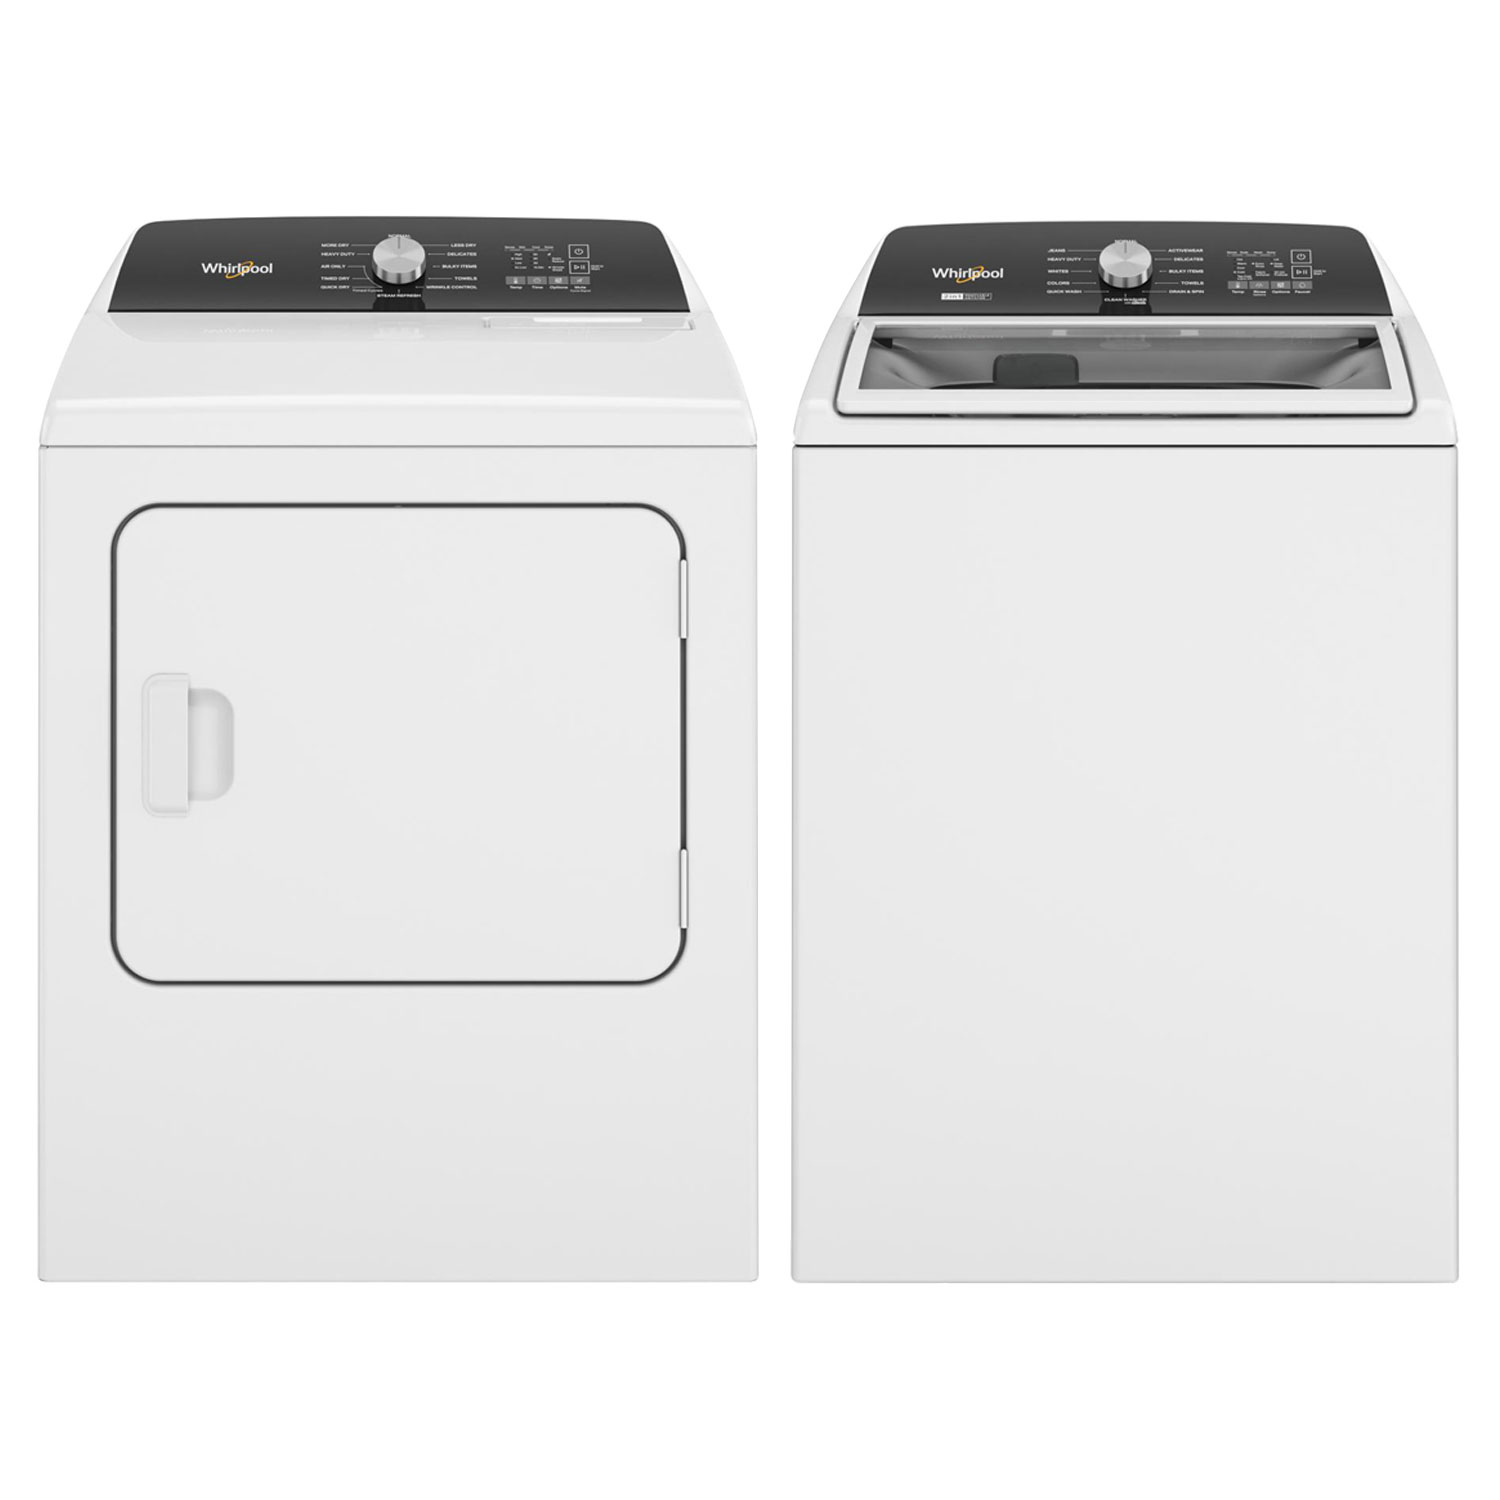 Whirlpool 5.4 cu. ft. High Efficiency Top Load Washer & 7.0 cu. ft. Electric Steam Dryer - White